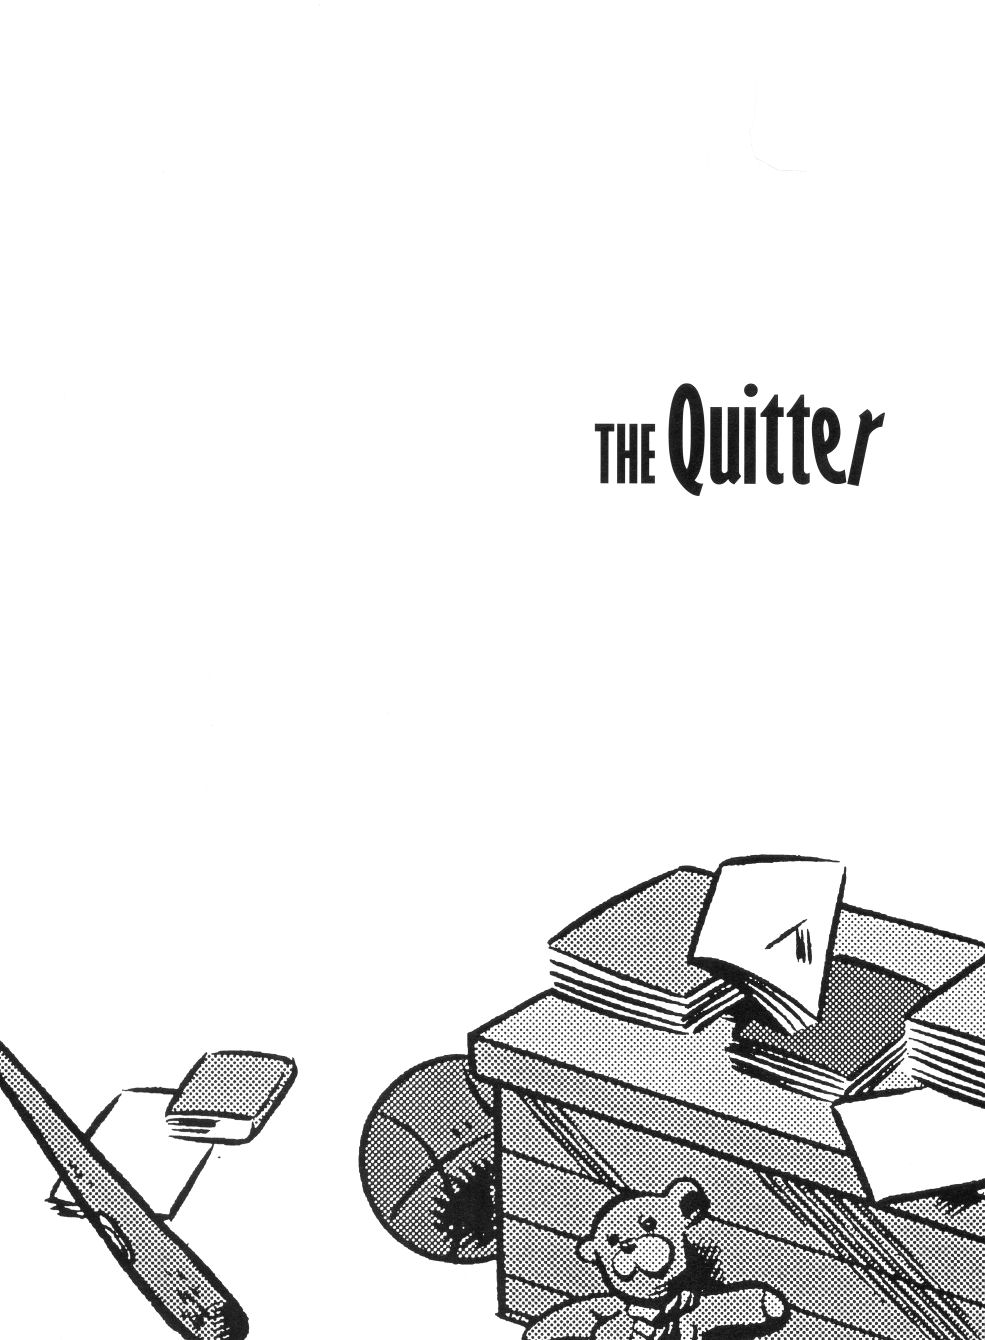 Read online The Quitter comic -  Issue # TPB - 4